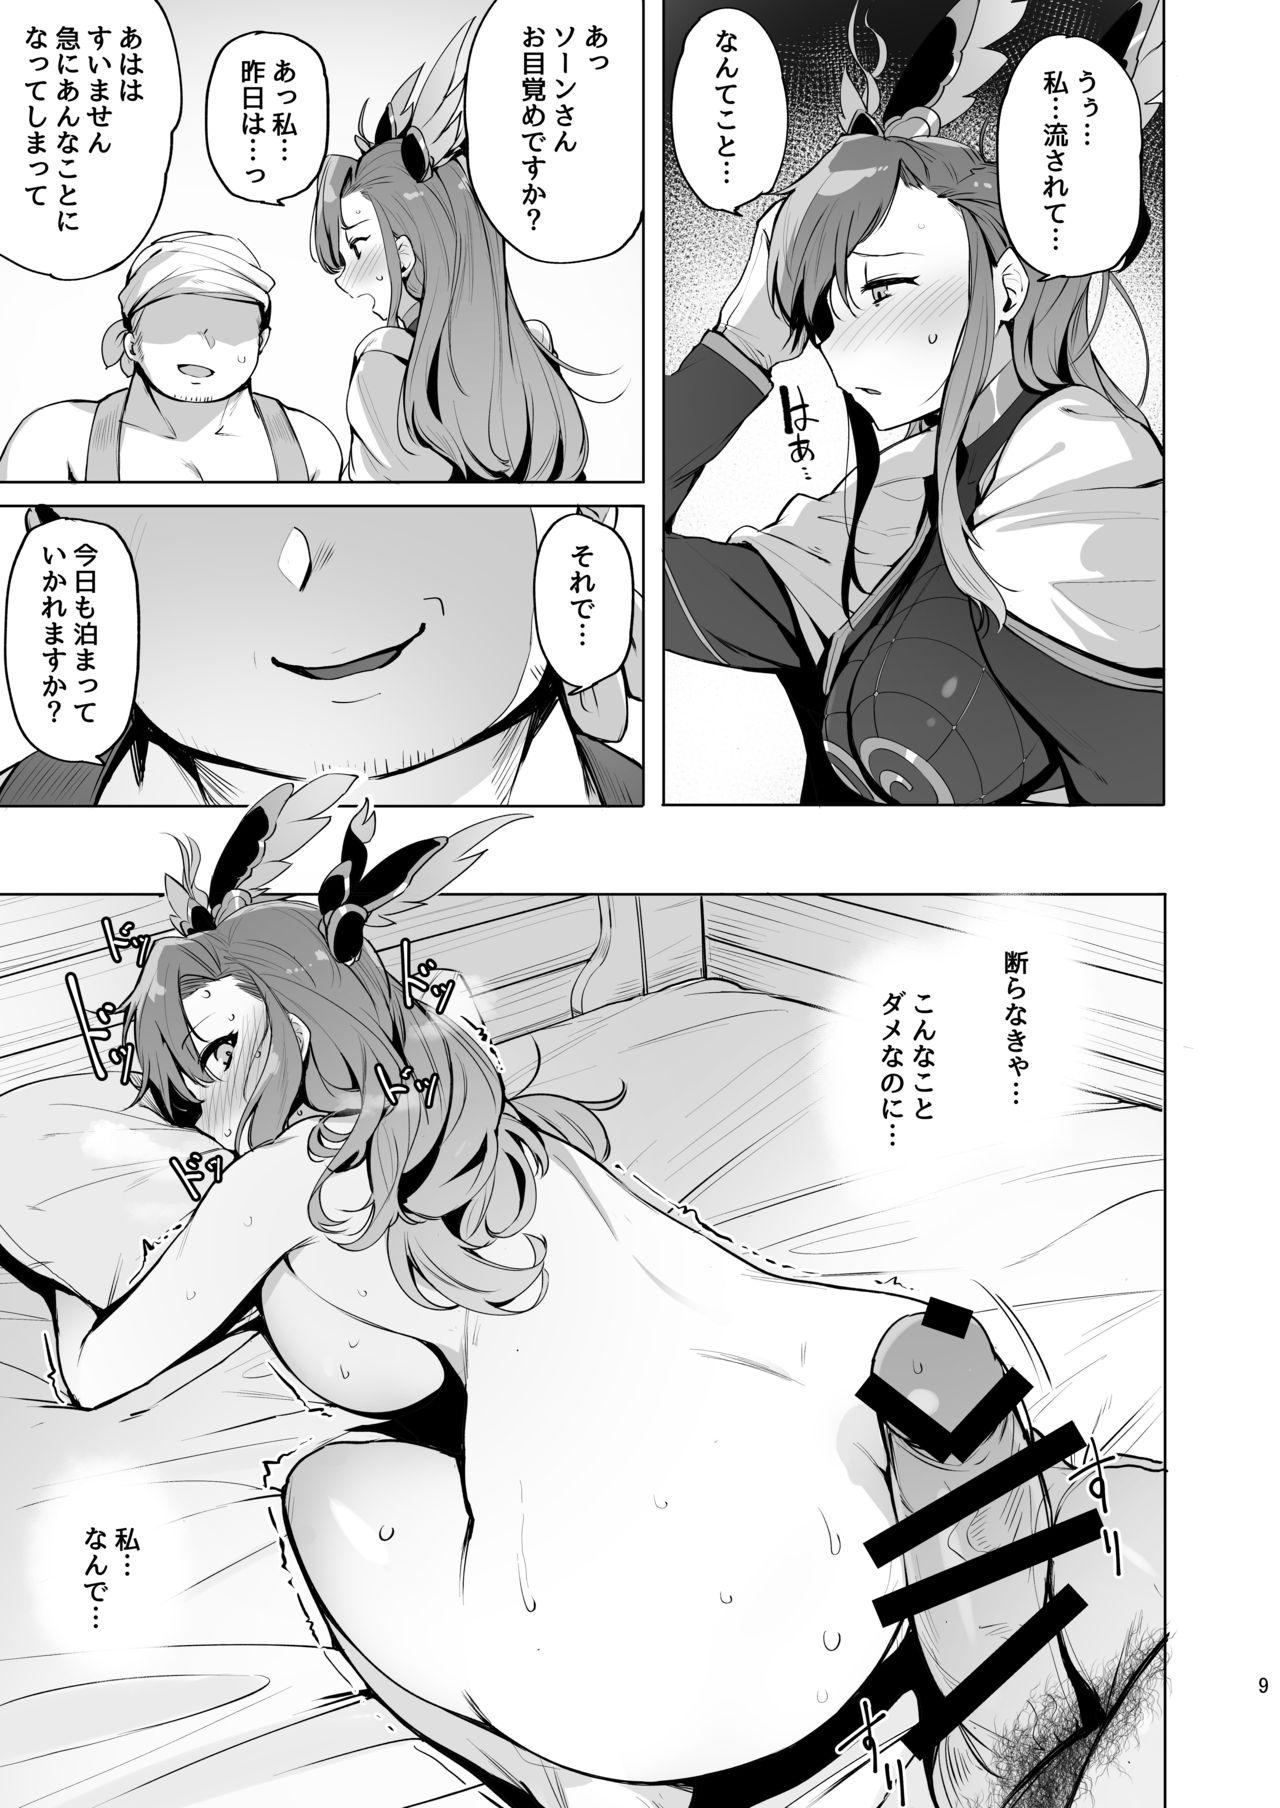 Uniform Deep in the eyes - Granblue fantasy Huge Boobs - Page 9